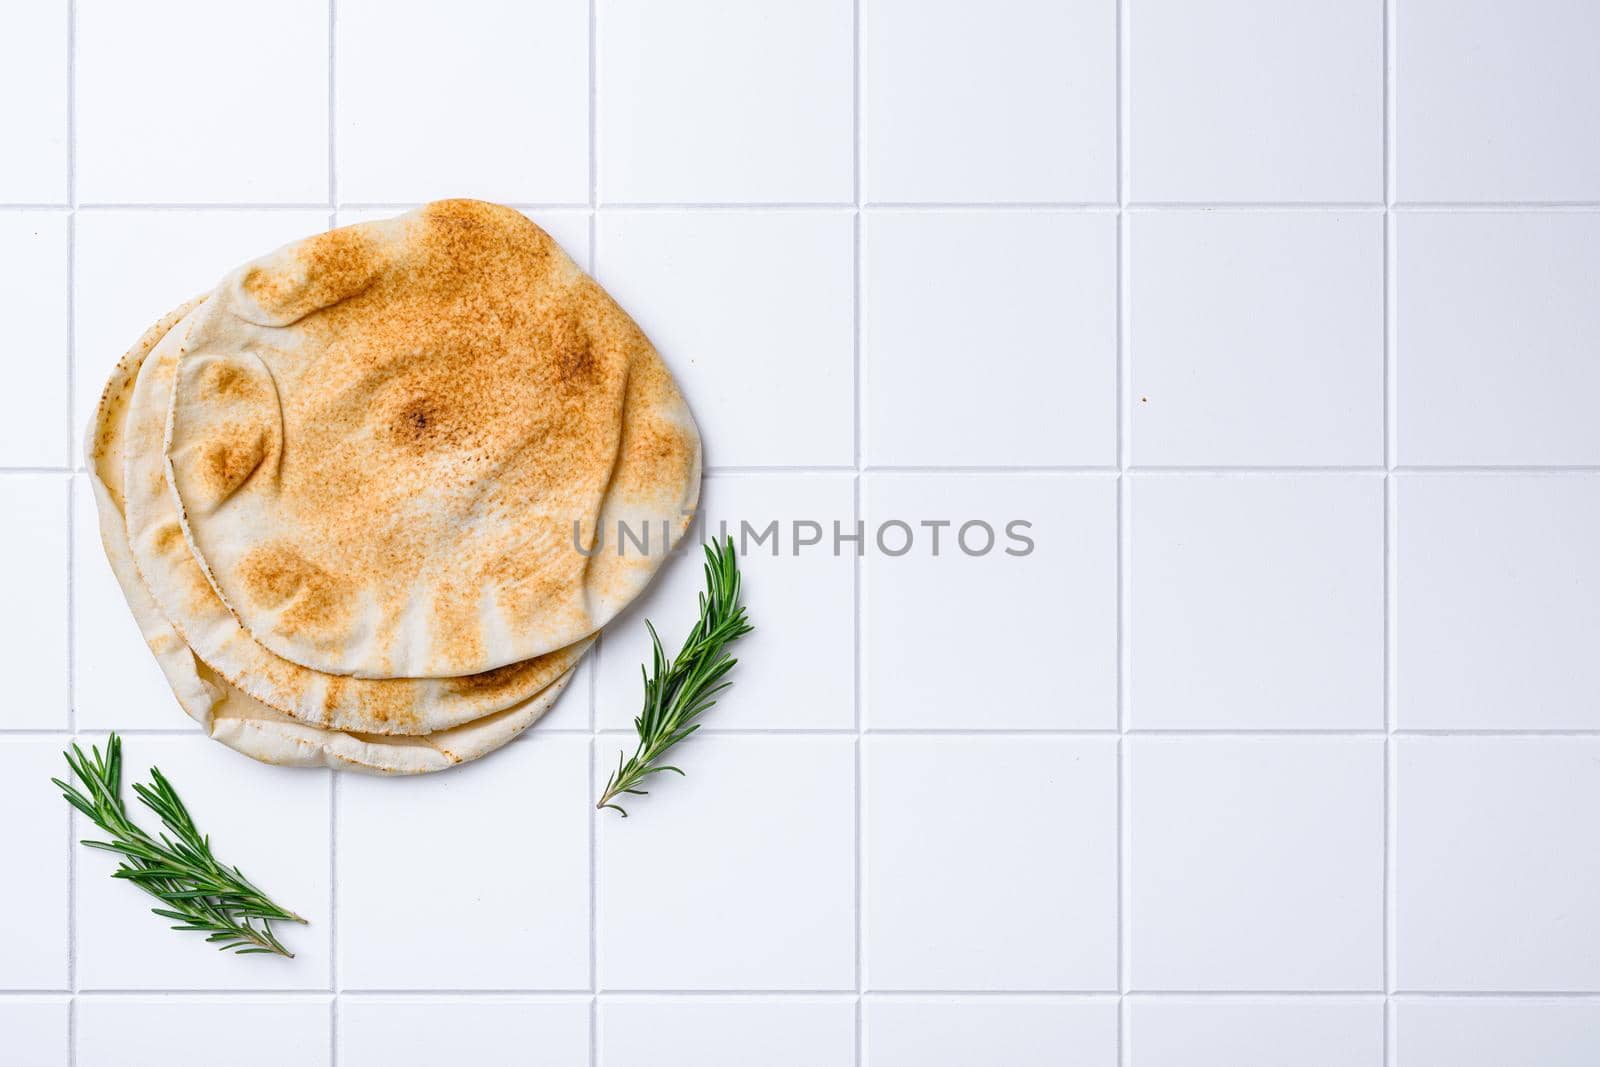 Pita flat bread, on white ceramic squared tile table background, top view flat lay, with copy space for text